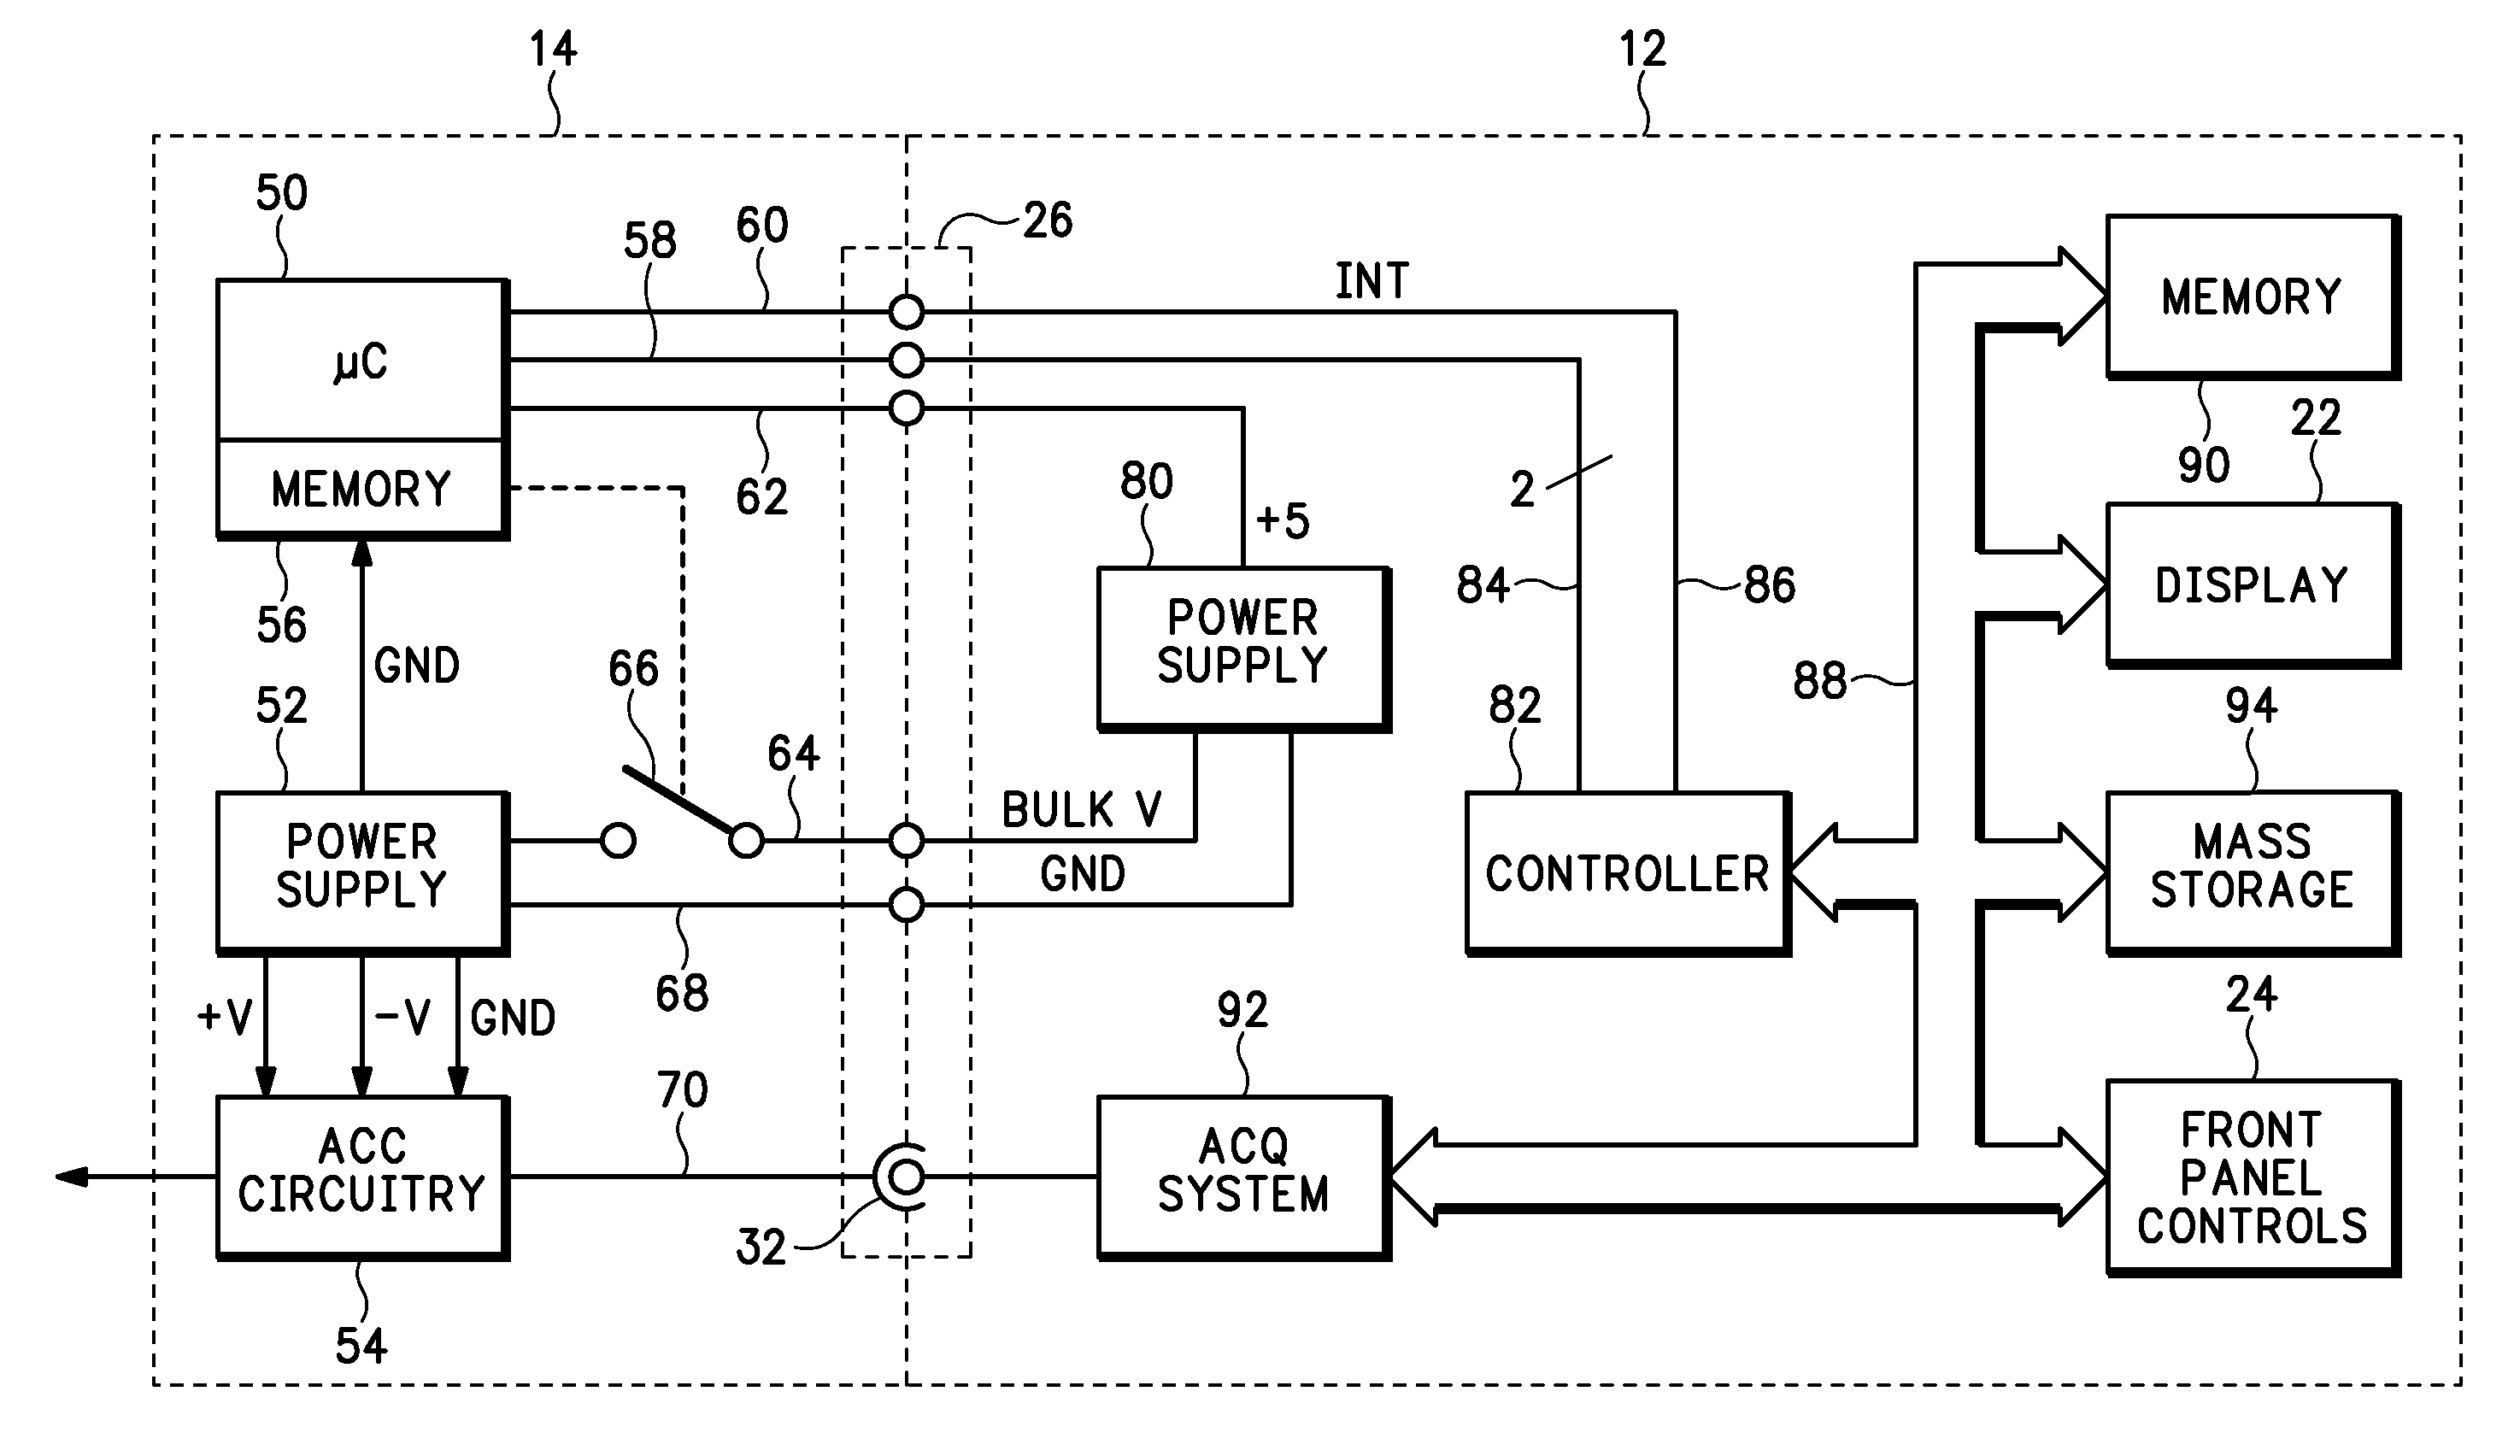 Host controlled voltage input system for an accessory device